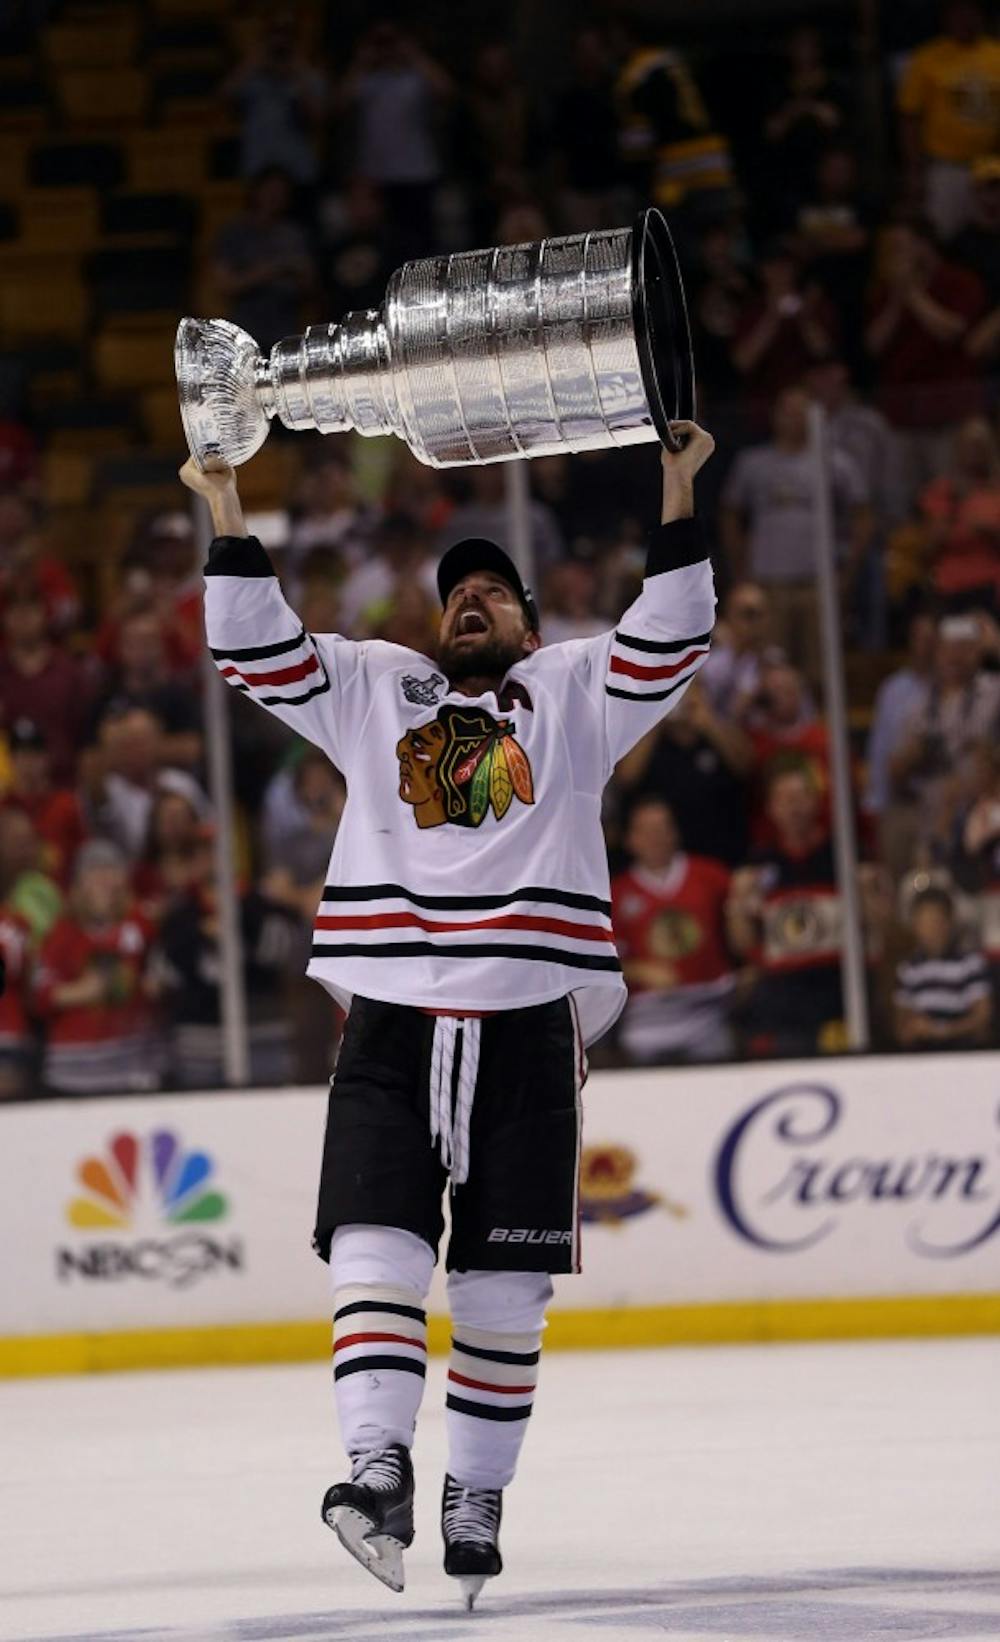 Blackhawks center Patrick Sharp lifts the trophy after Chicago defeated the Boston Bruins, 3-2, to win the Stanley Cup at TD Garden in Boston, Massachusetts, Monday, June 22, 2013. (Scott Strazzante/Chicago Tribune/MCT)